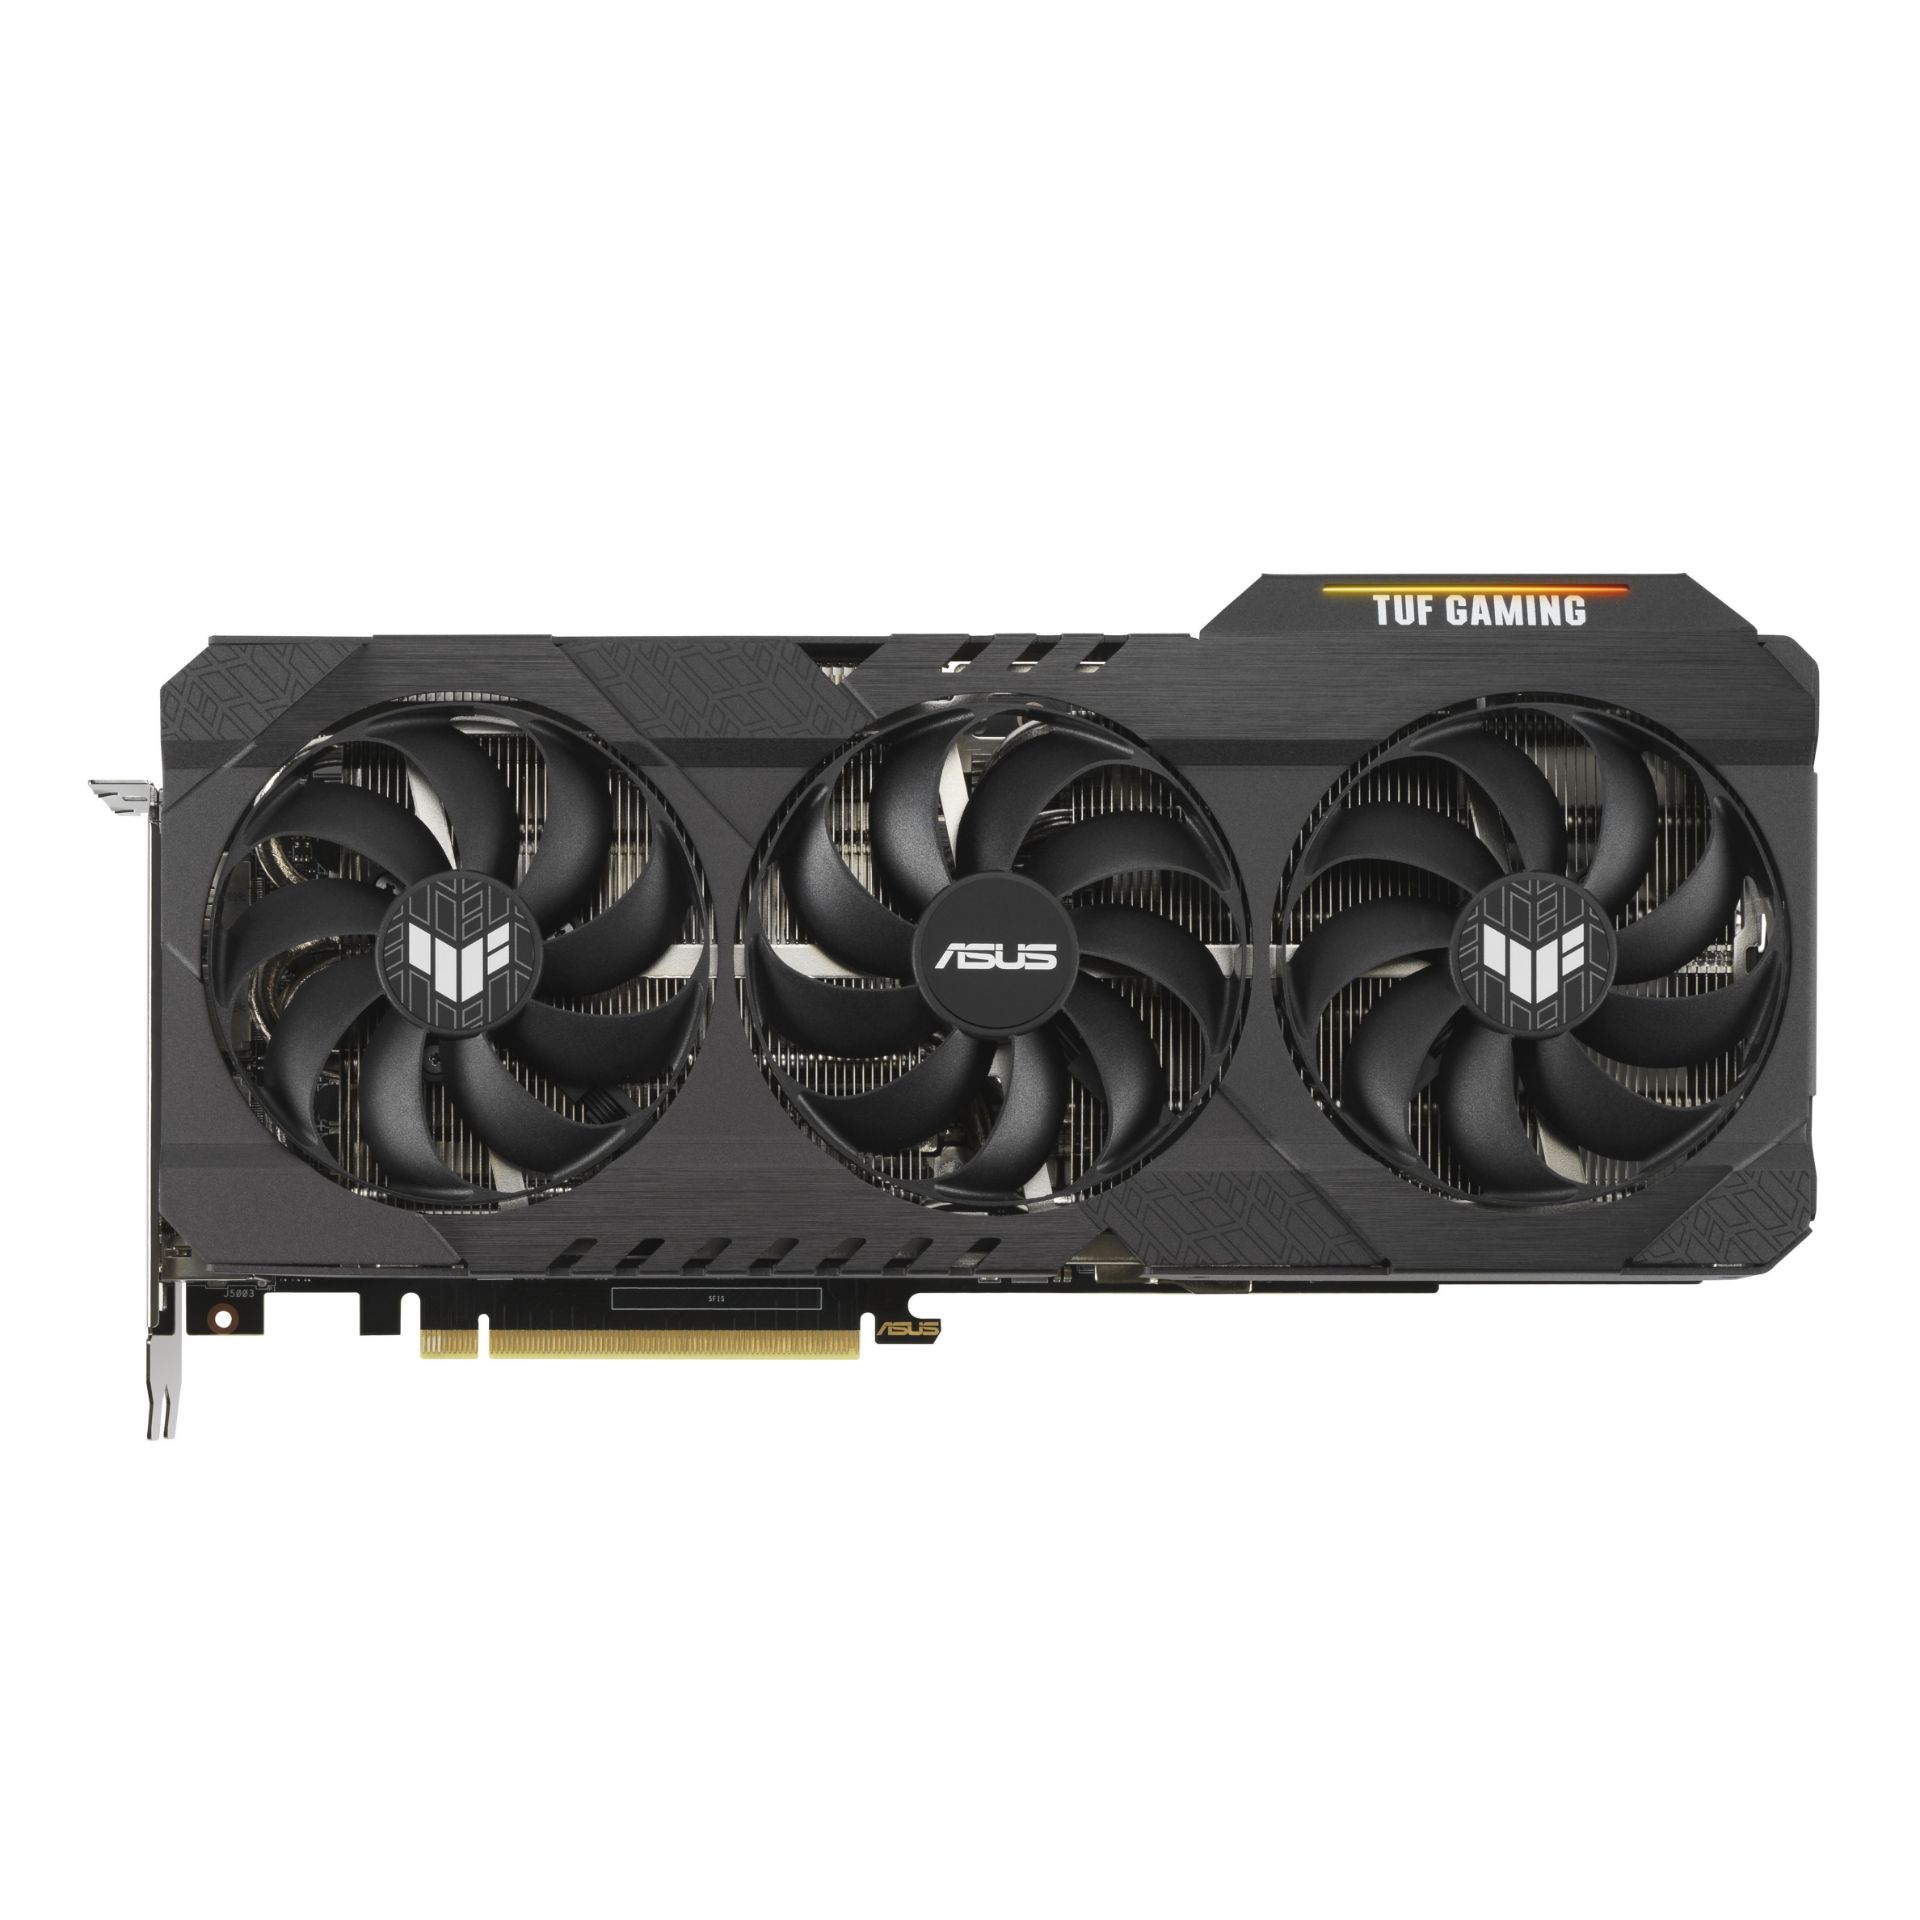 TUF-RTX3090-O24G-GAMING Graphics Card. - P1. RRP £1,575.00. The building blocks for the world’s